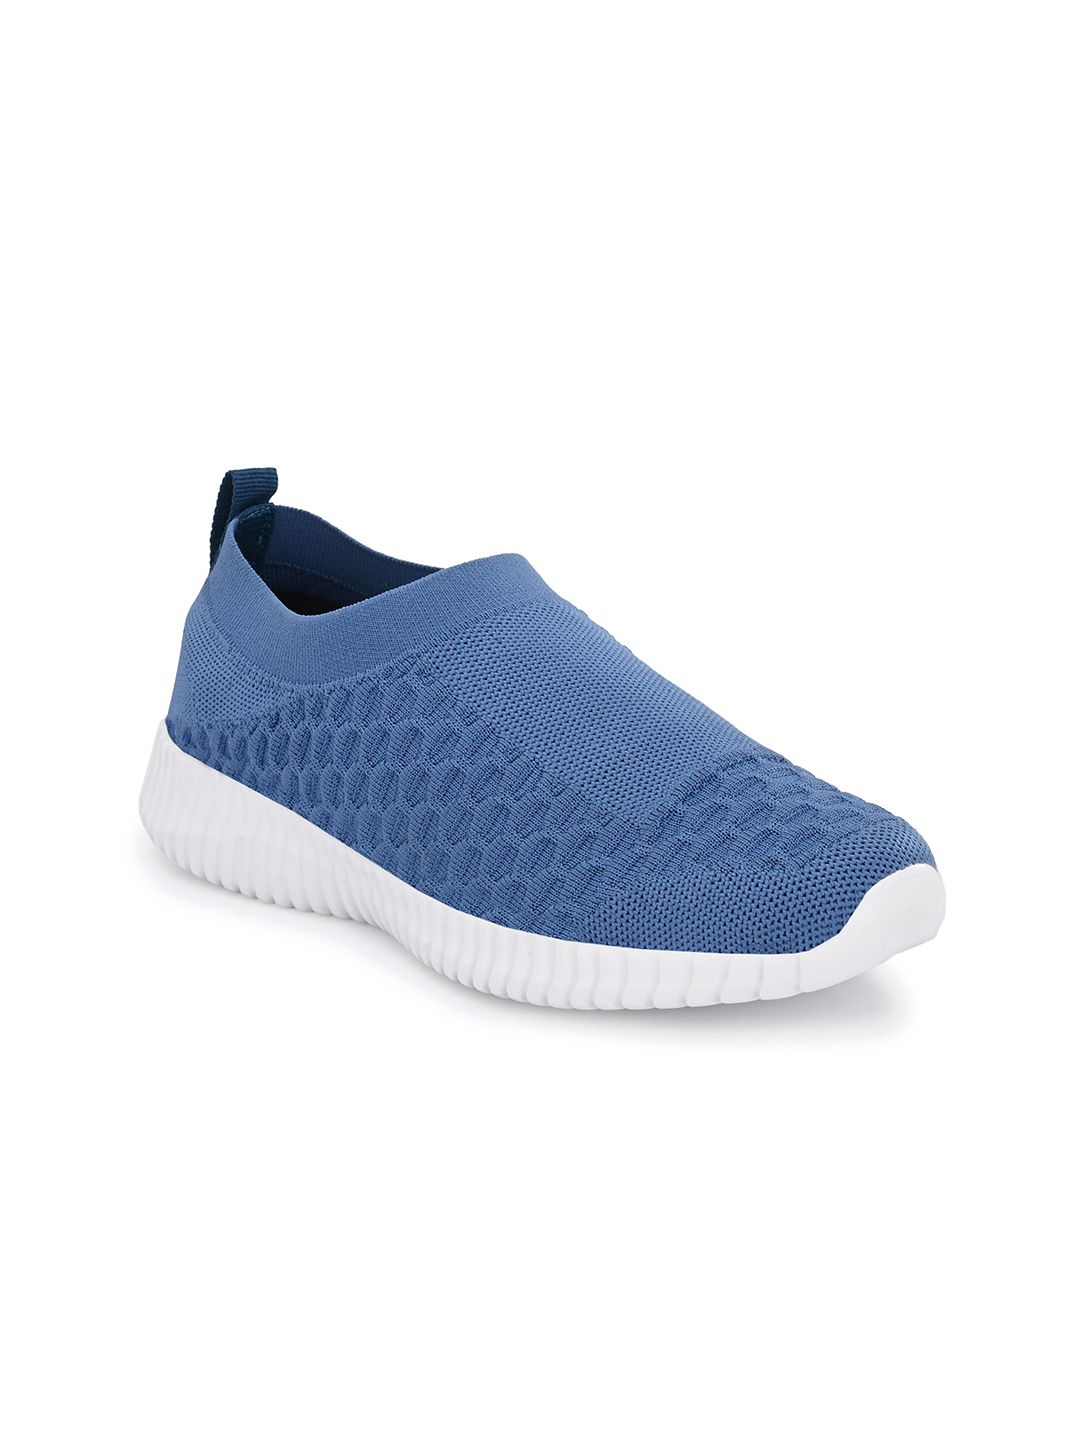 OFF LIMITS Women Blue Mesh Walking Non-Marking Shoes Price in India